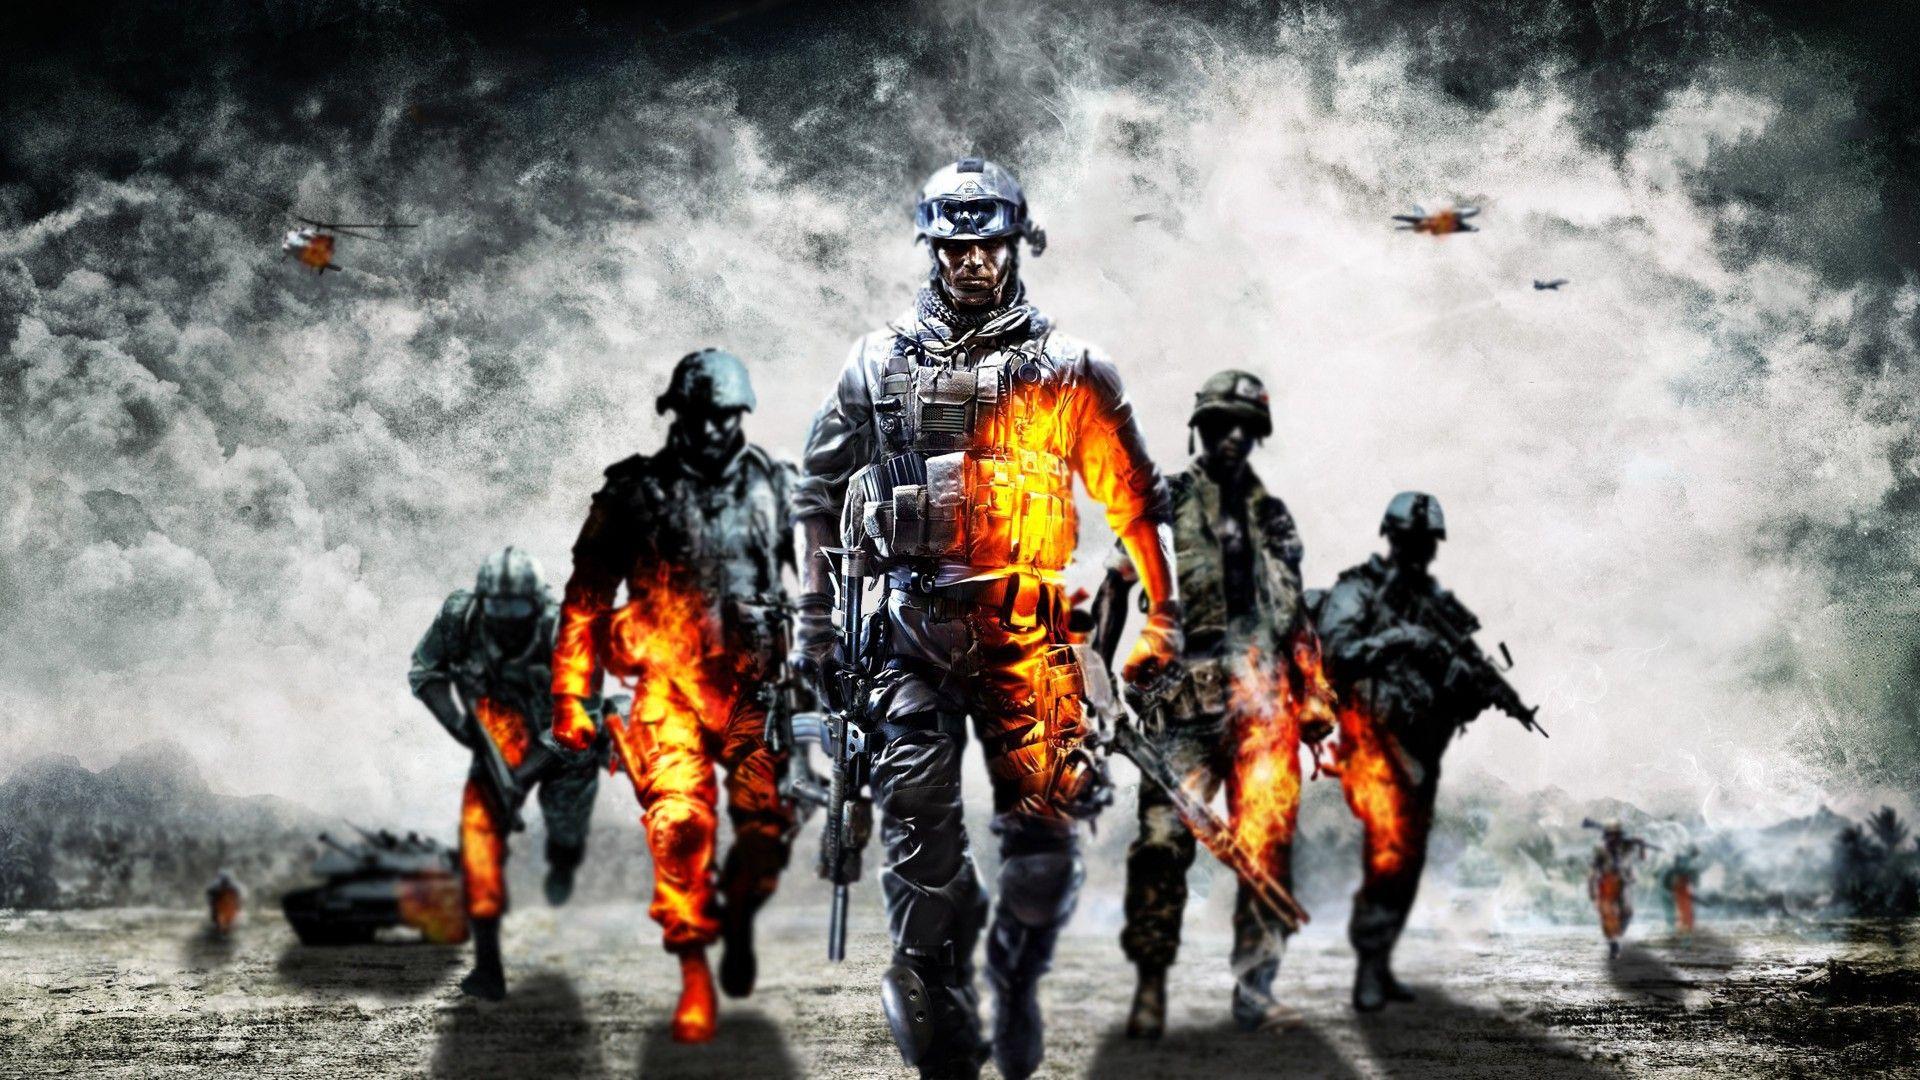 Battlefield 3: Prolly the sickest, realistic FPS of all time